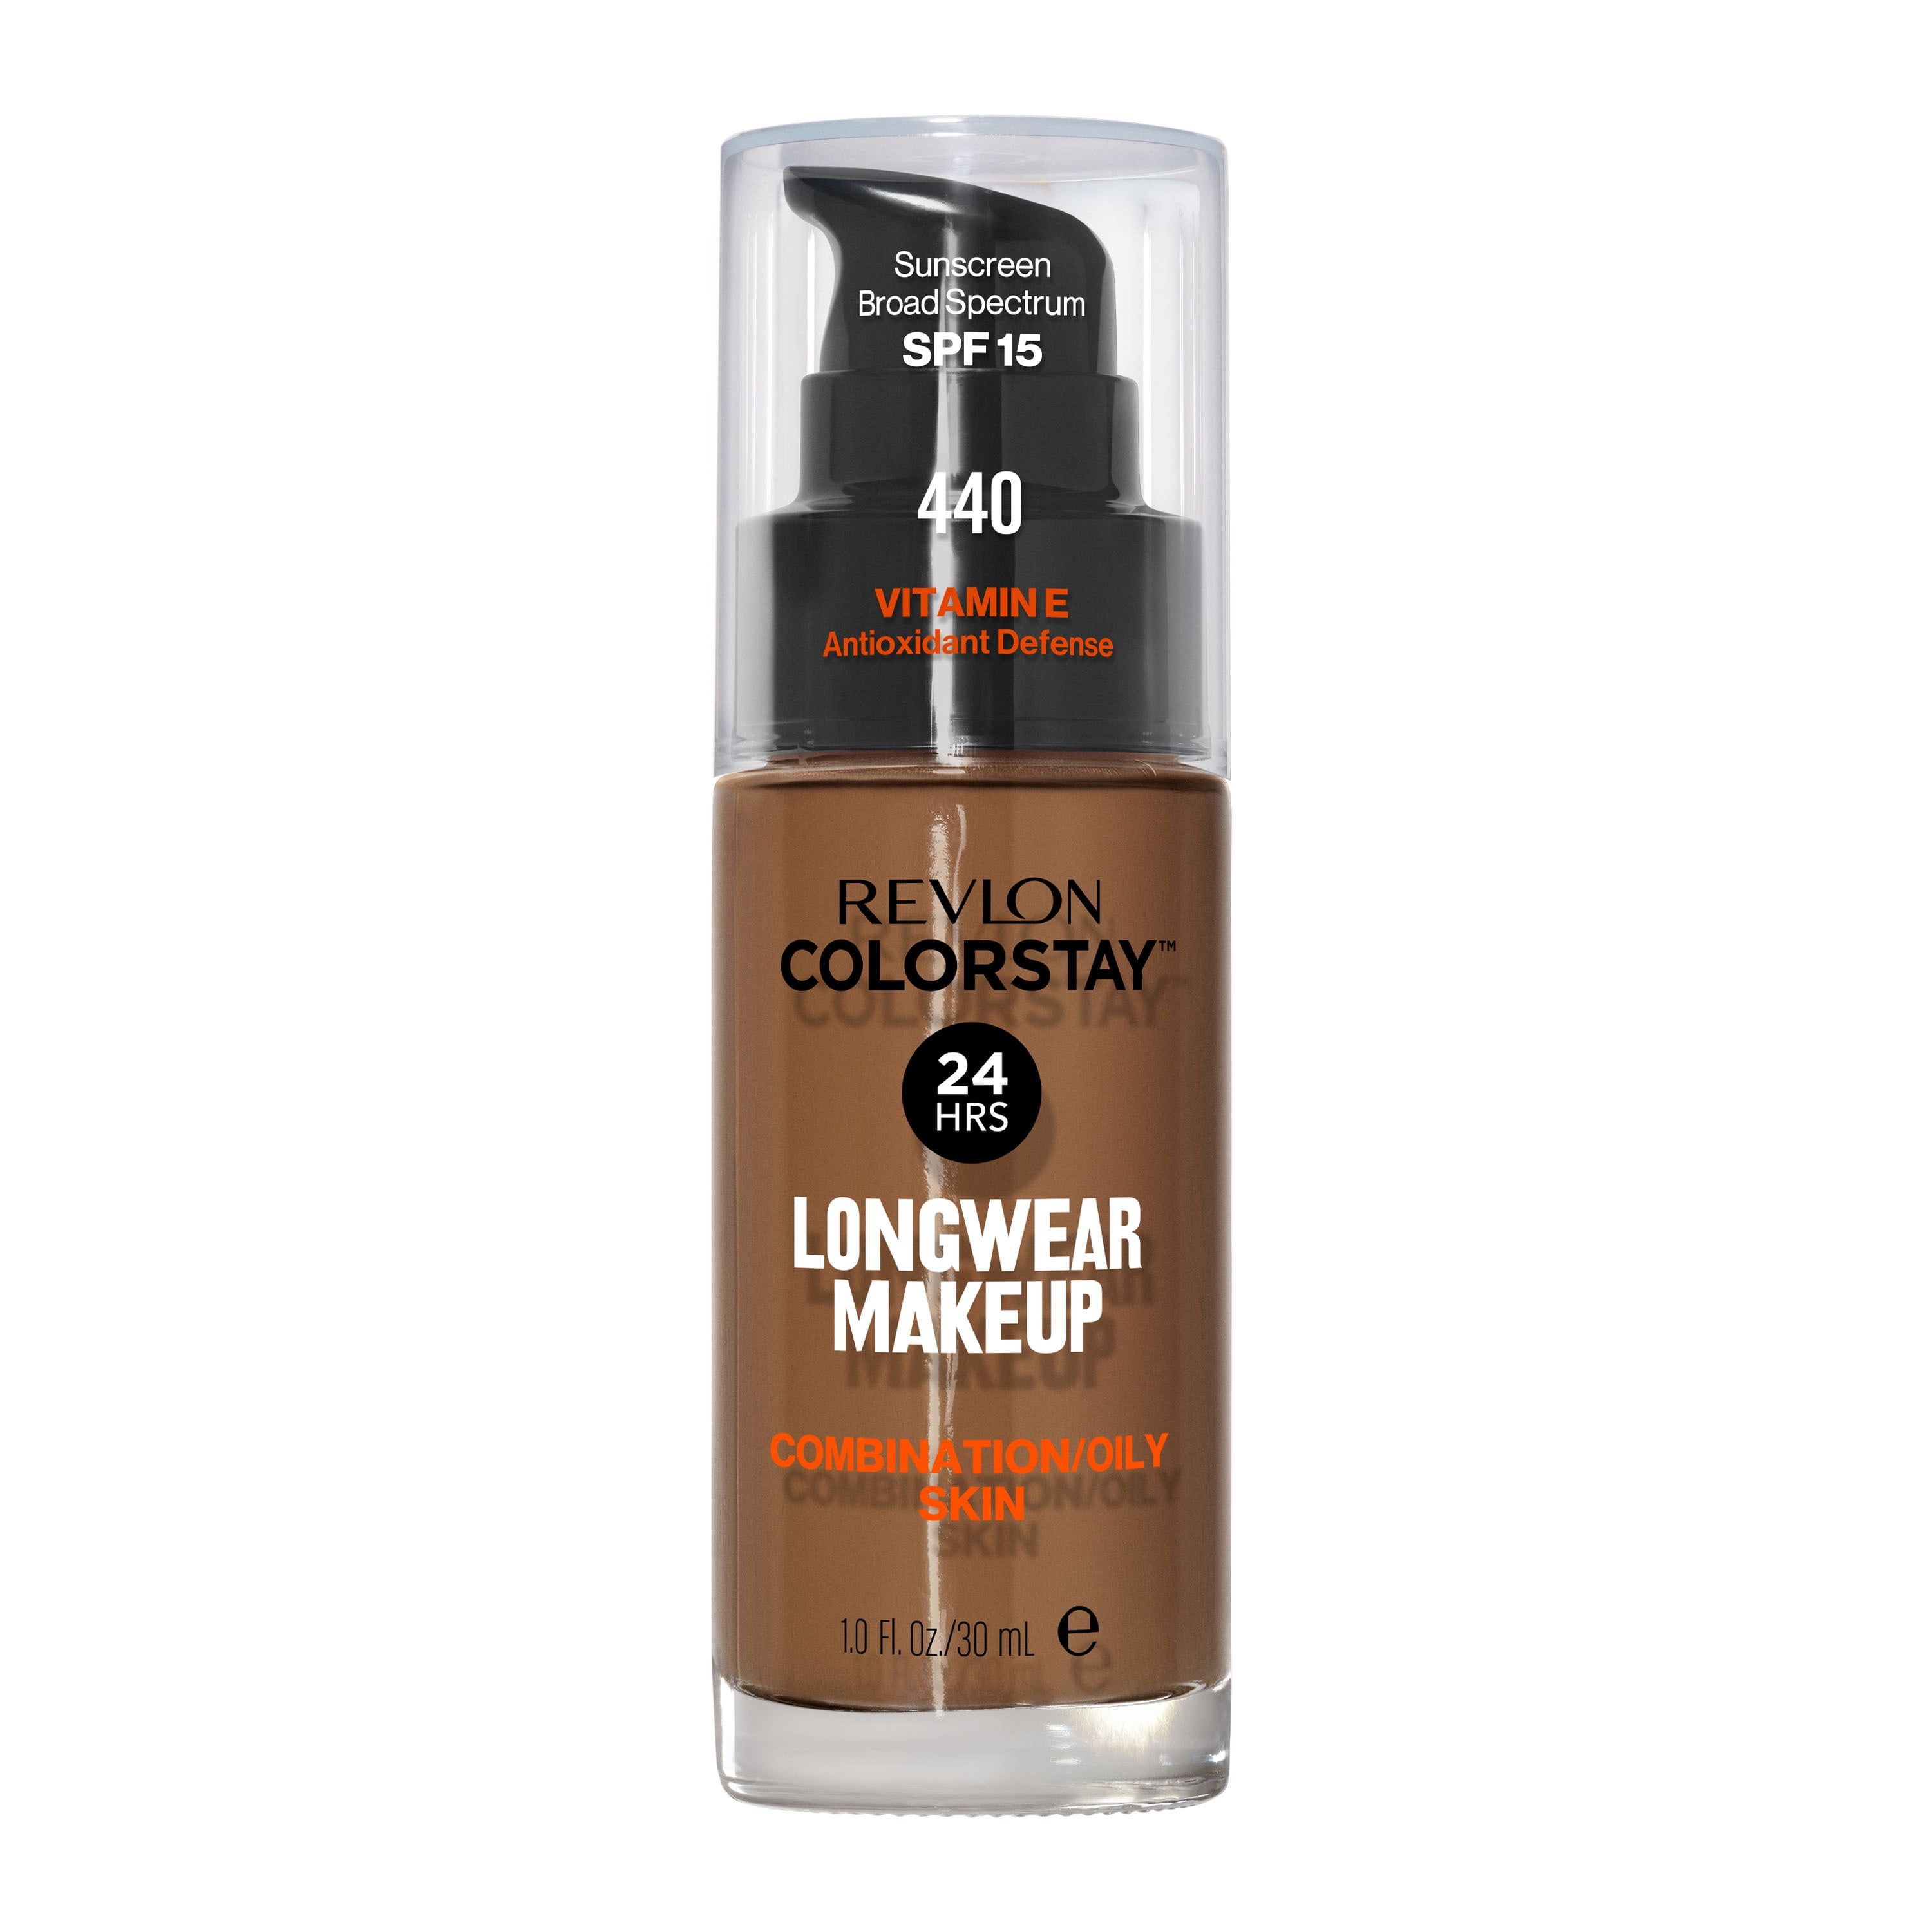 Liquid Foundation by Revlon, ColorStay Face Makeup for Combination & Oily Skin, SPF 15, Longwear Medium-Full Coverage with Matte Finish, 440 Mahogany